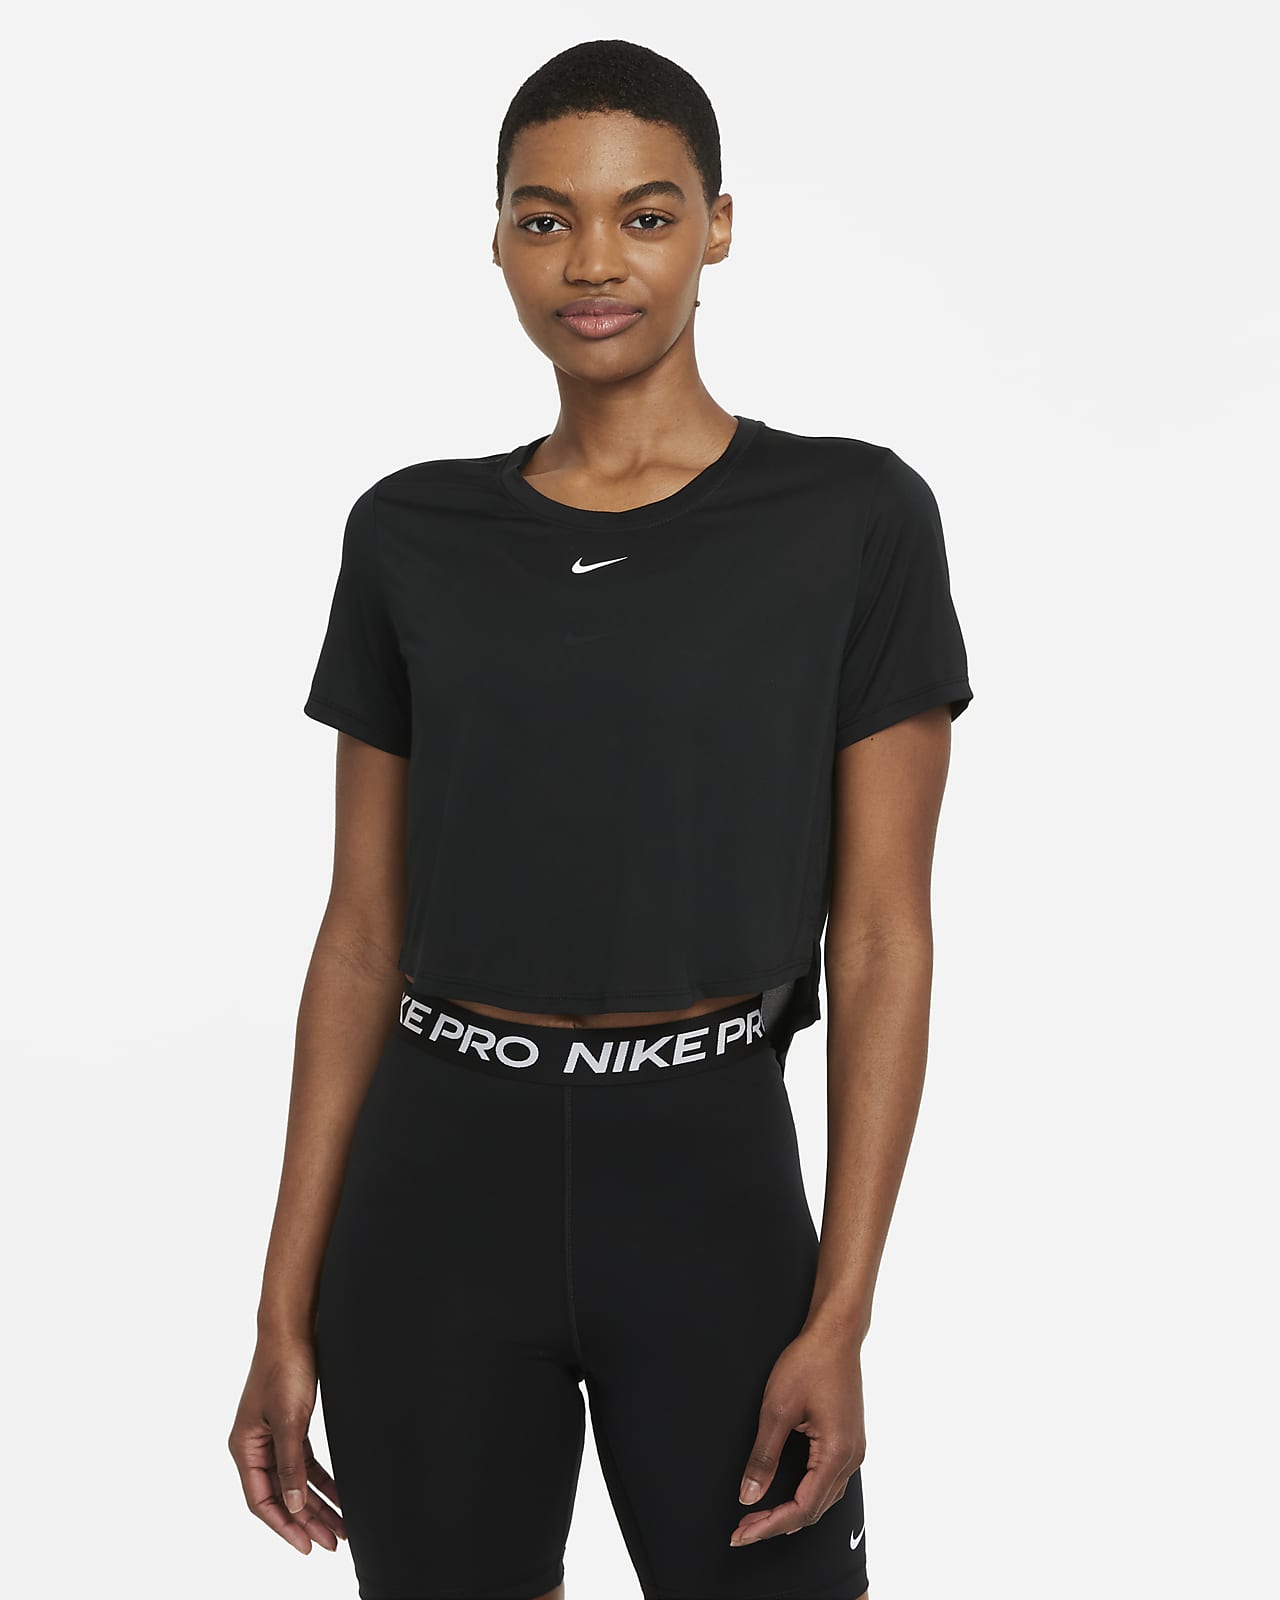 https://static.nike.com/a/images/t_PDP_1280_v1/f_auto,q_auto:eco/78c939de-74da-4c50-a7a6-02b3574f1095/dri-fit-one-womens-standard-fit-short-sleeve-cropped-top-c3jKNg.png